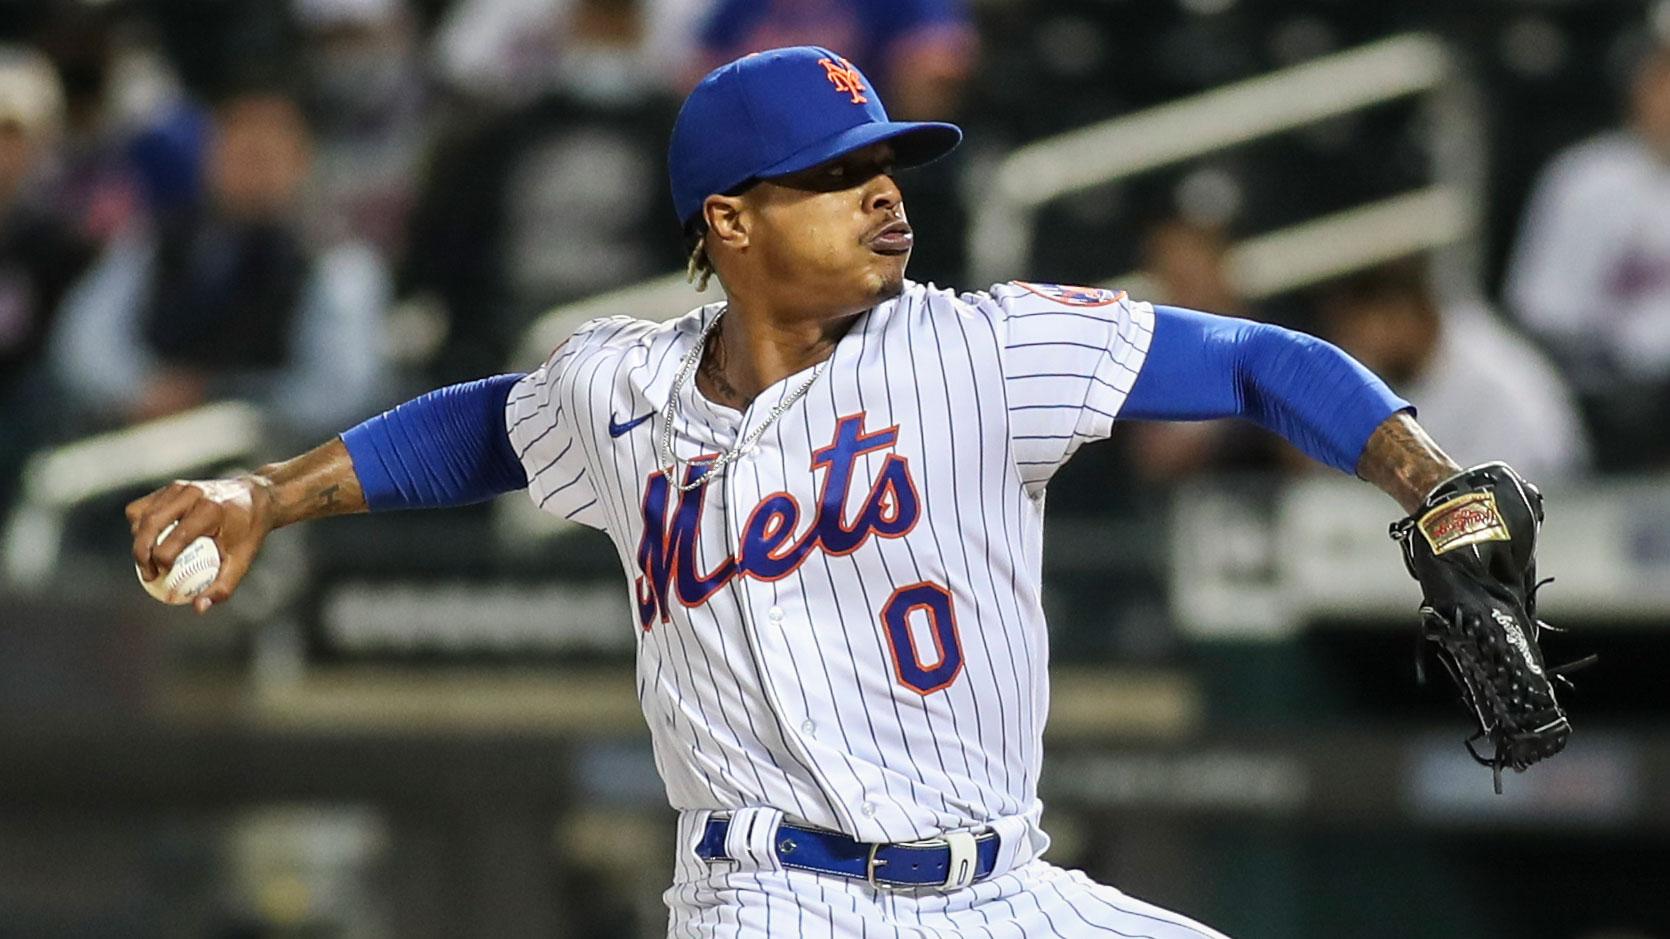 Apr 13, 2021; New York City, New York, USA; New York Mets pitcher Marcus Stroman (0) throws against the Philadelphia Phillies in the first inning at Citi Field. / Wendell Cruz-USA TODAY Sports